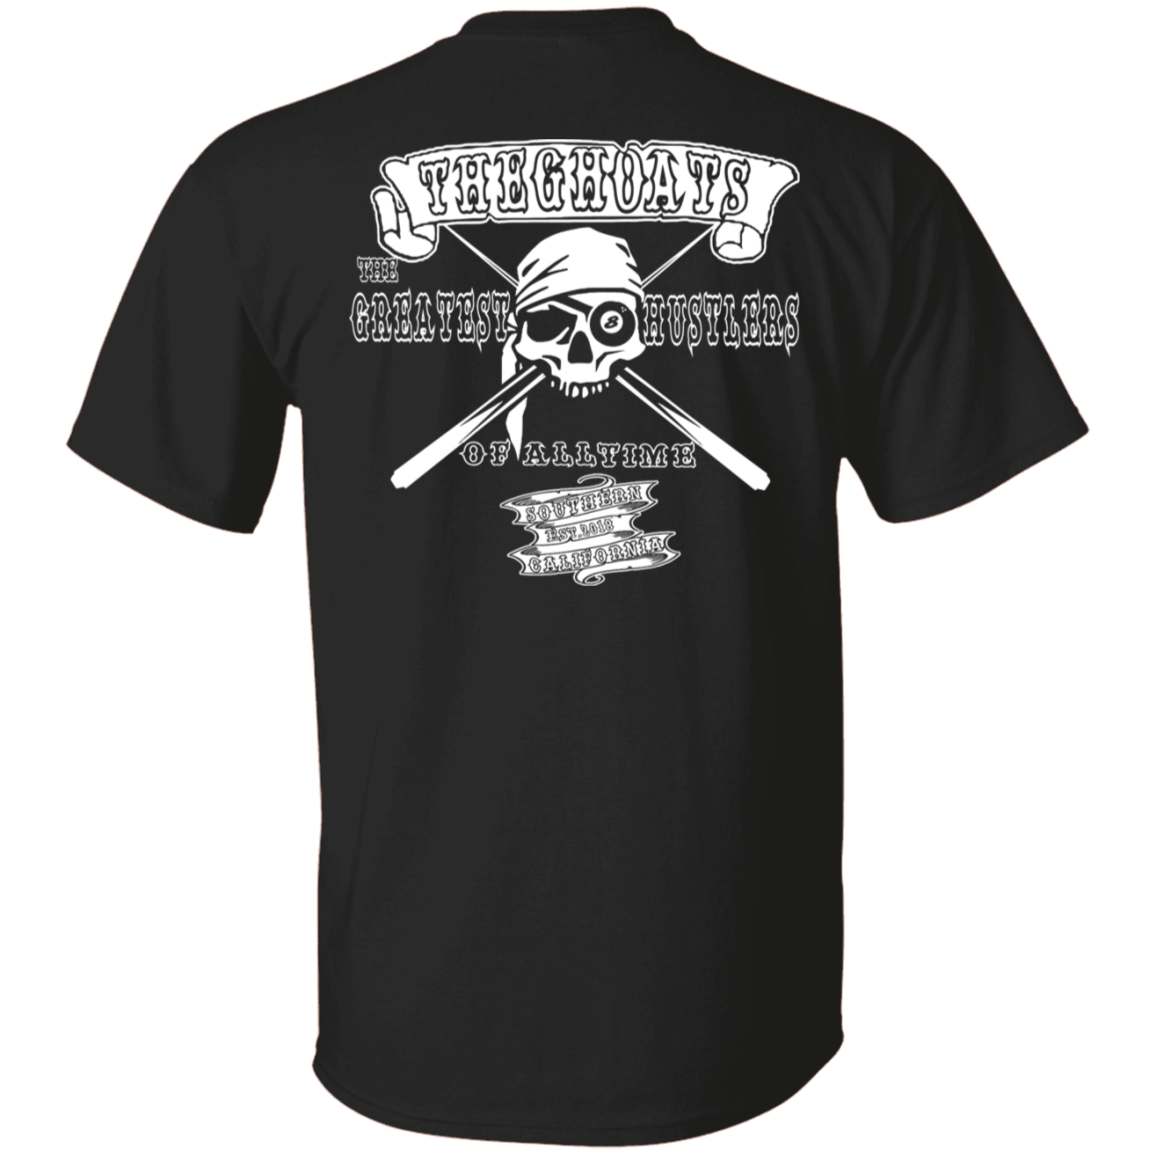 The GHOATS Custom Design. #4 Motorcycle Club Style. Ver 2/2. Basic Cotton T-Shirt